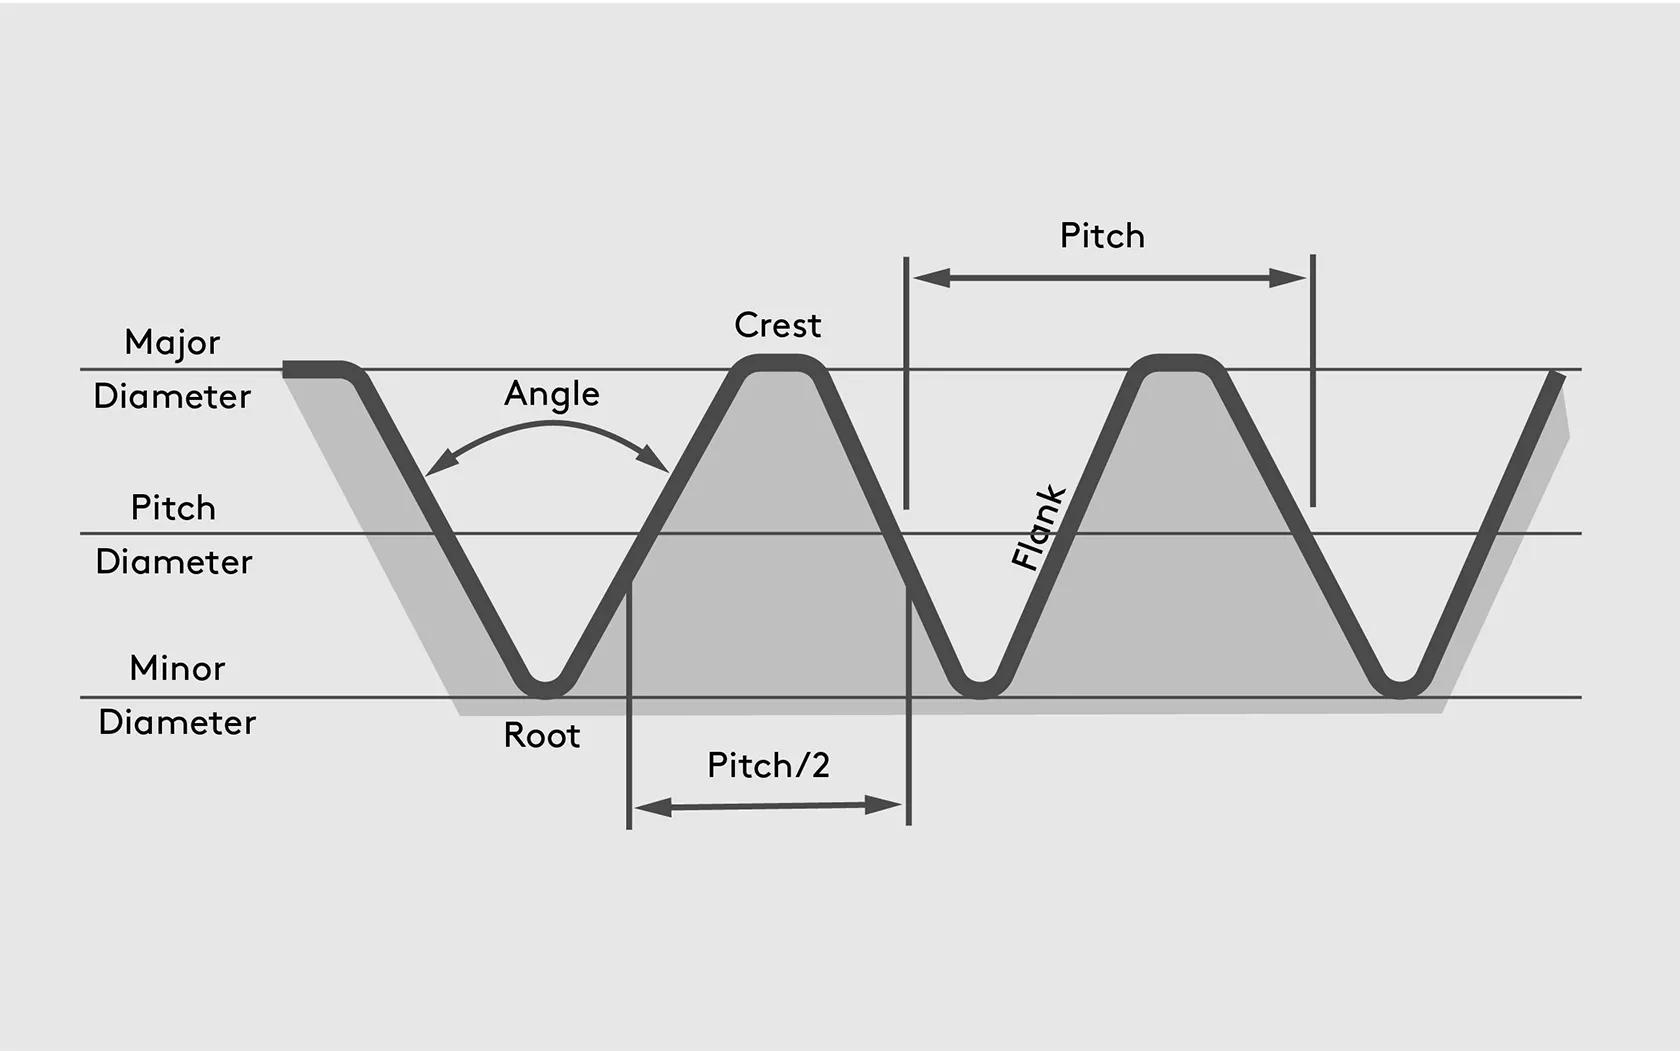 Parts of bolt pitch